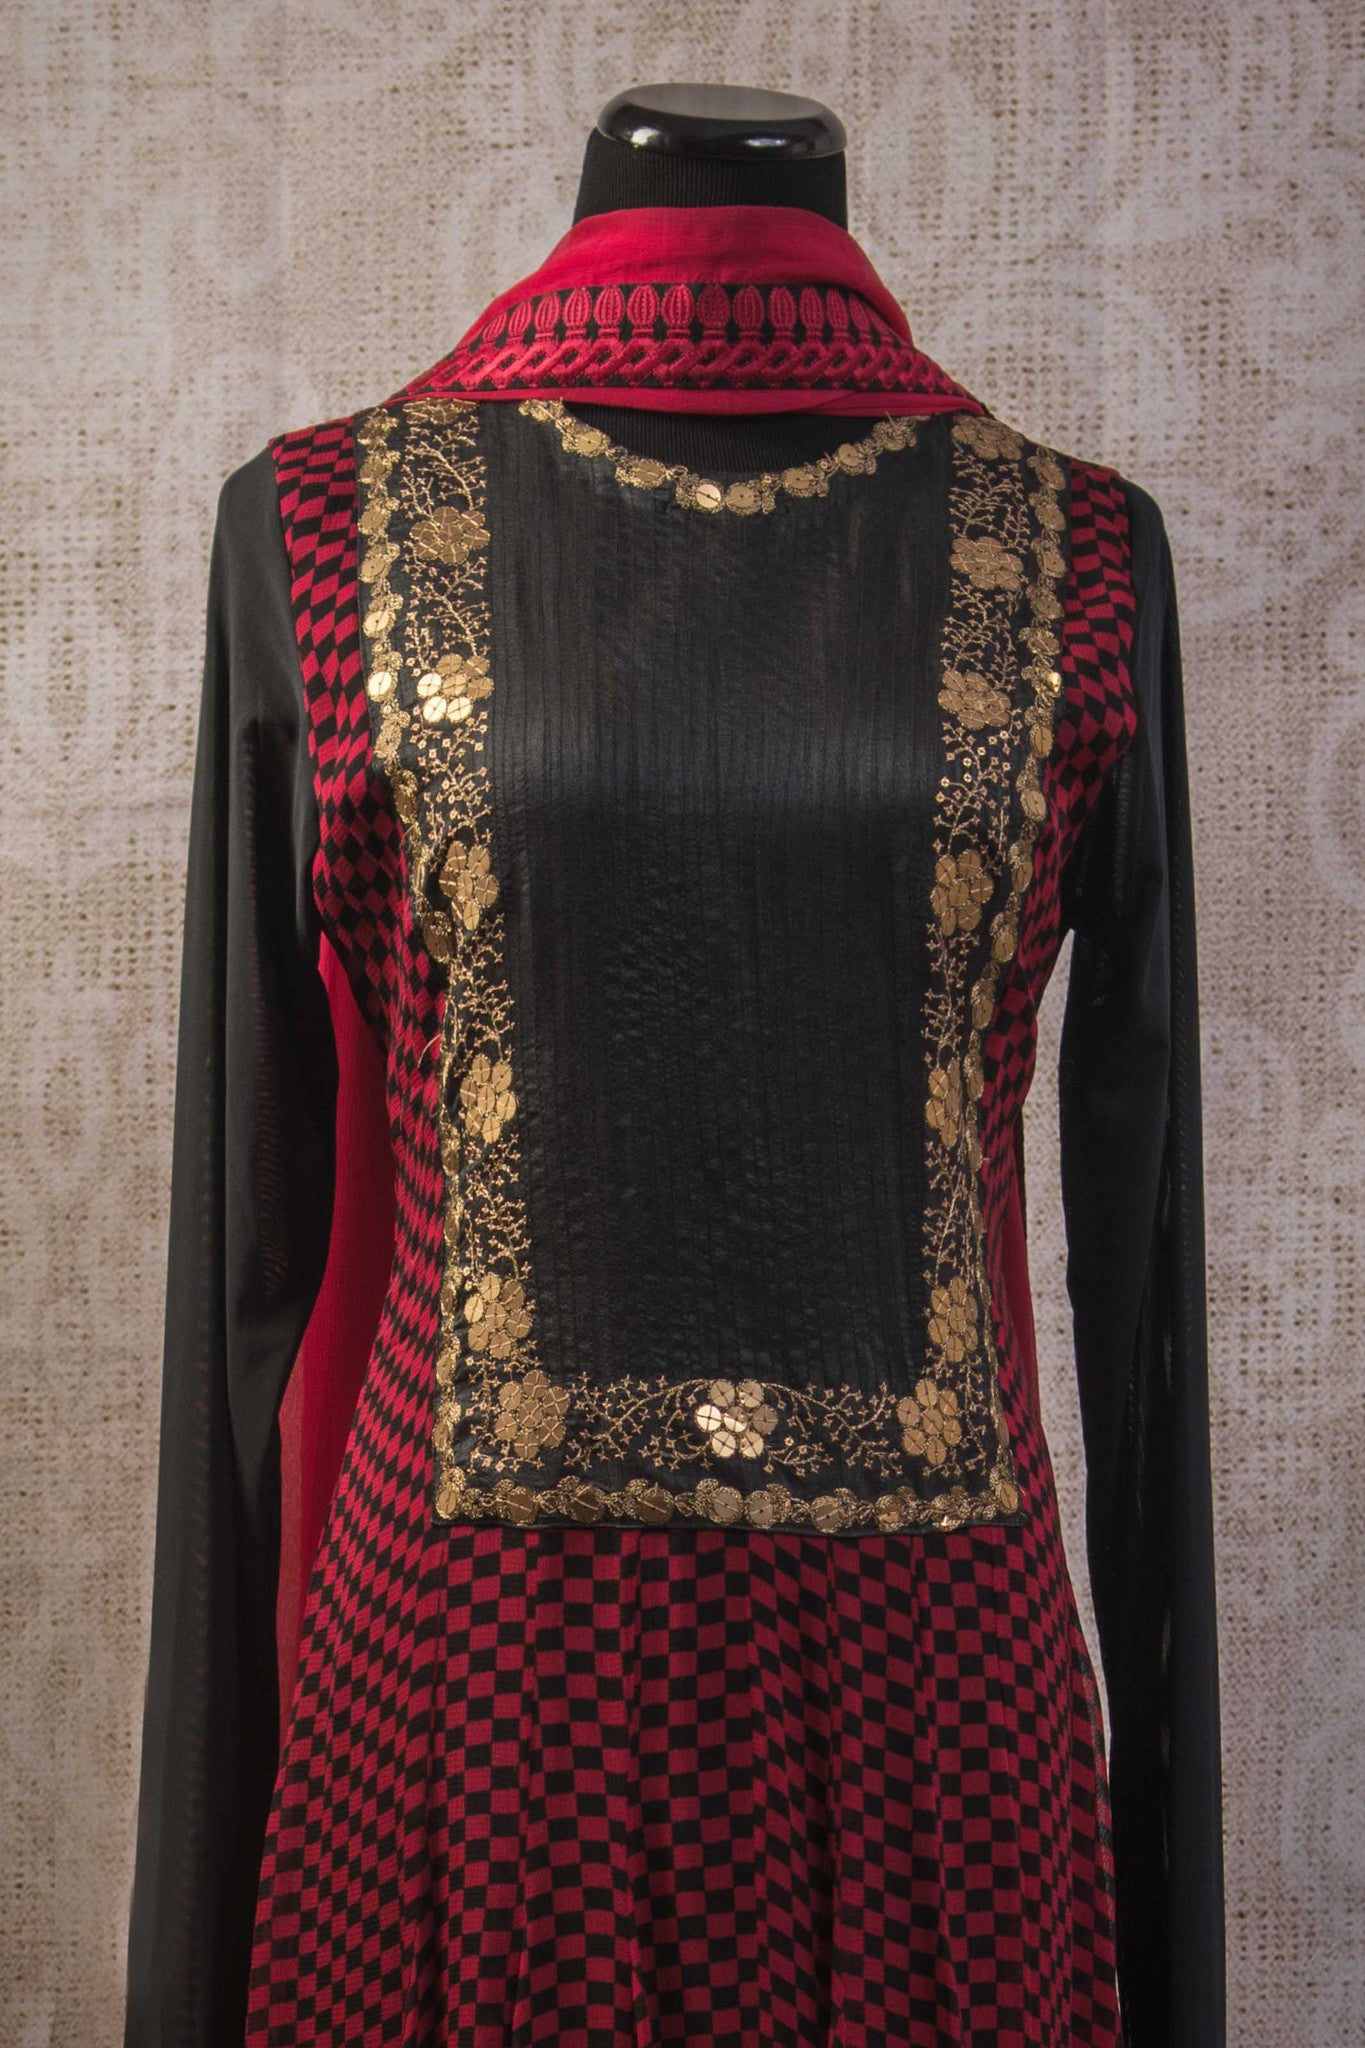 500942-suit-long-sleeve-red-black-geometric-pattern-with-gold-embroidery-and-scarf-top-view